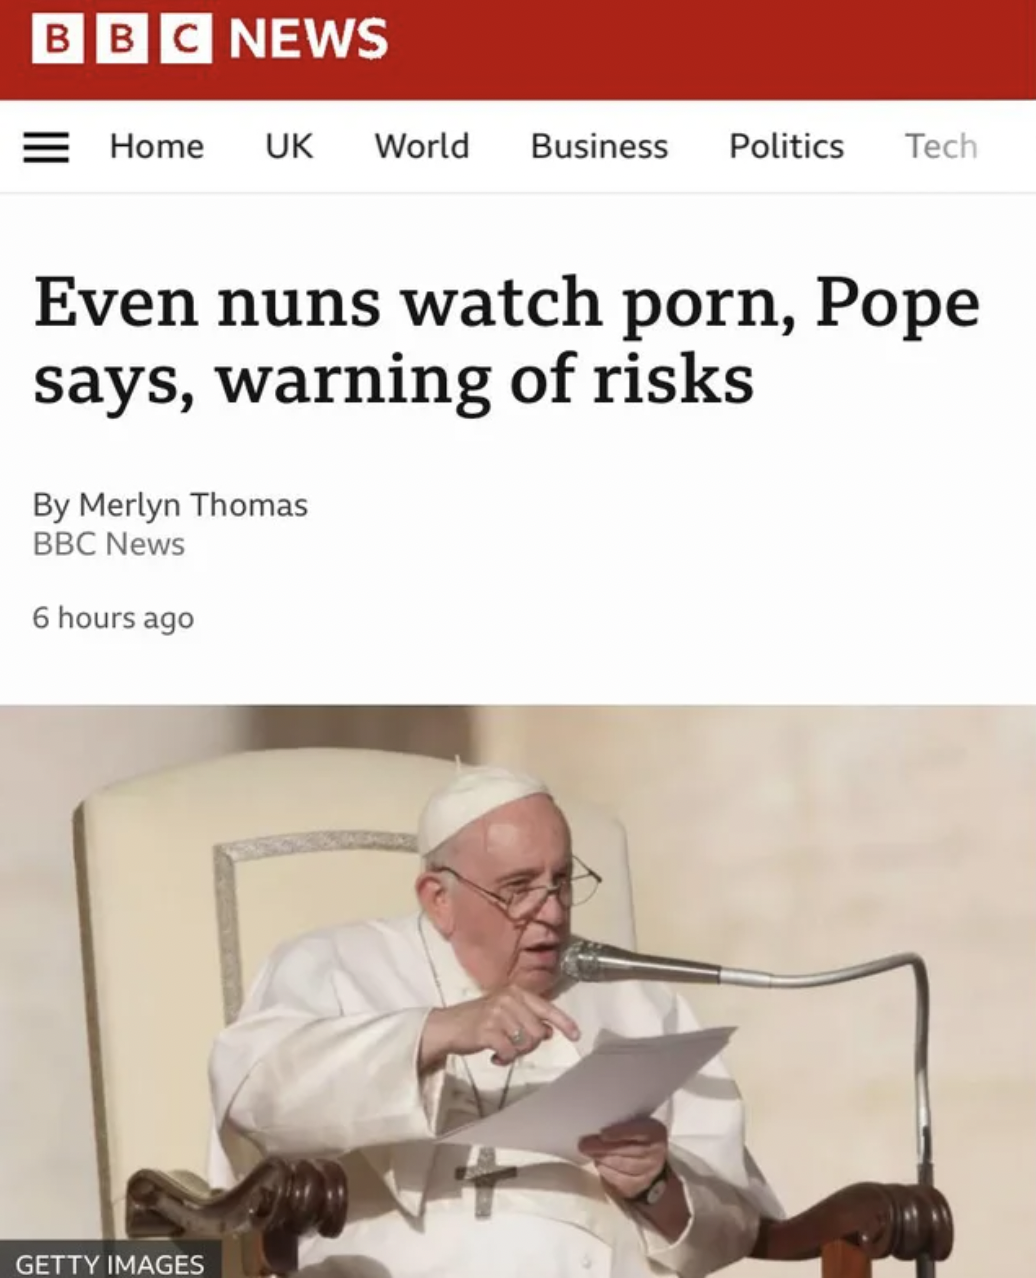 Funny facepalms - Pope Francis - Bbc News Home Uk World Business Politics Tech Even nuns watch porn, Pope says, warning of risks By Merlyn Thomas Bbc New